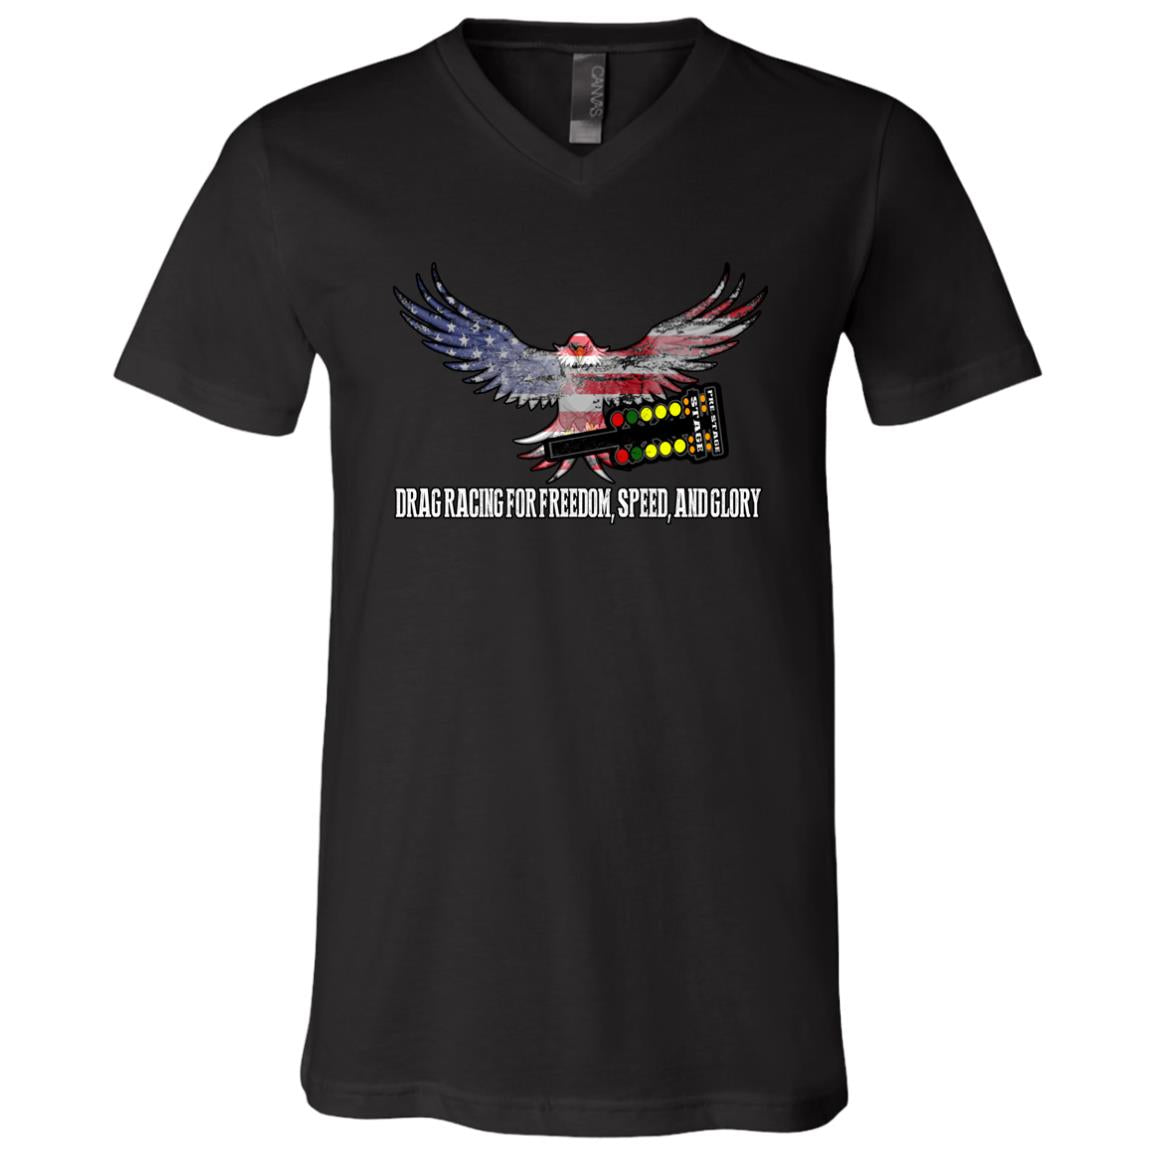 Drag Racing for Freedom, Speed, and Glory Unisex Jersey SS V-Neck T-Shirt